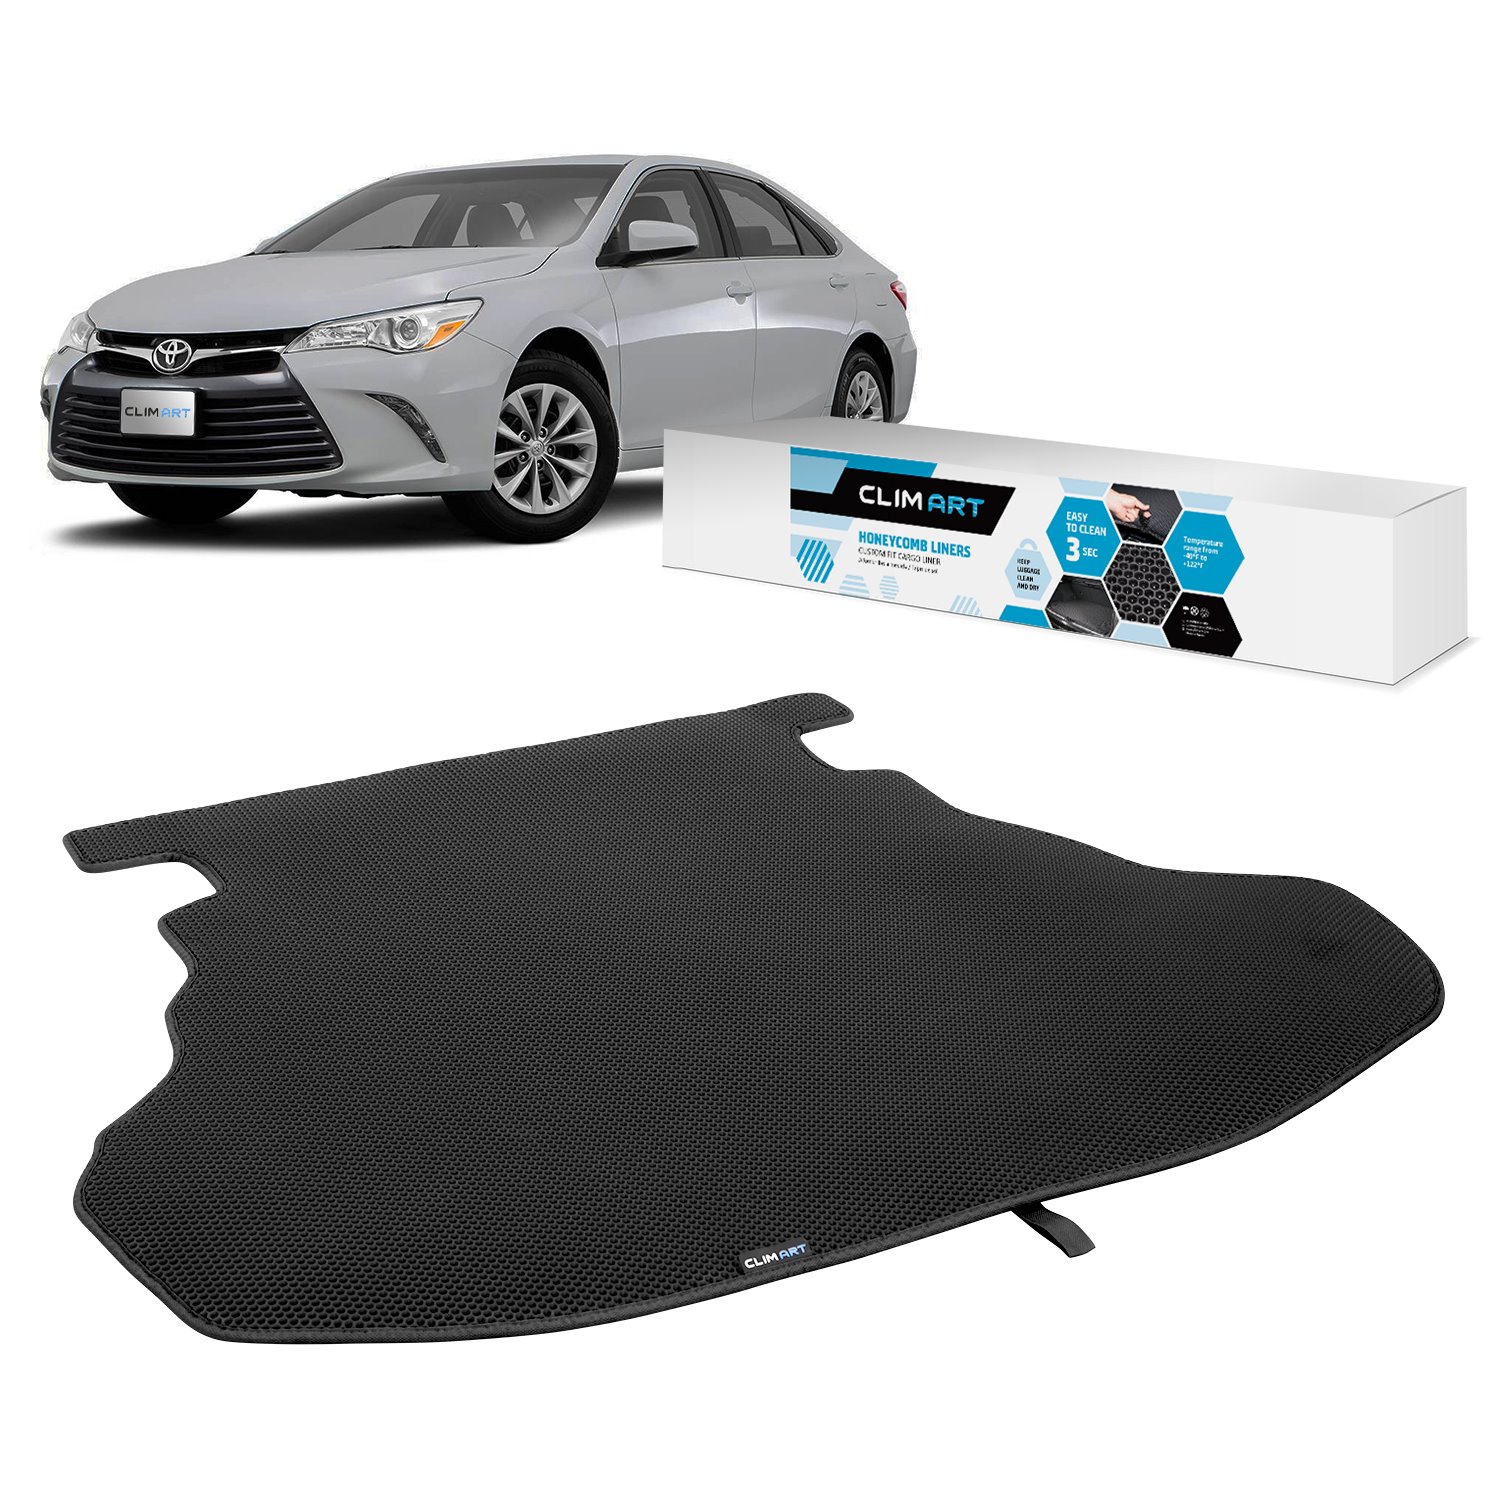 CLIM ART Honeycomb Custom Fit Cargo Liner for 2015-2017 Toyota Camry